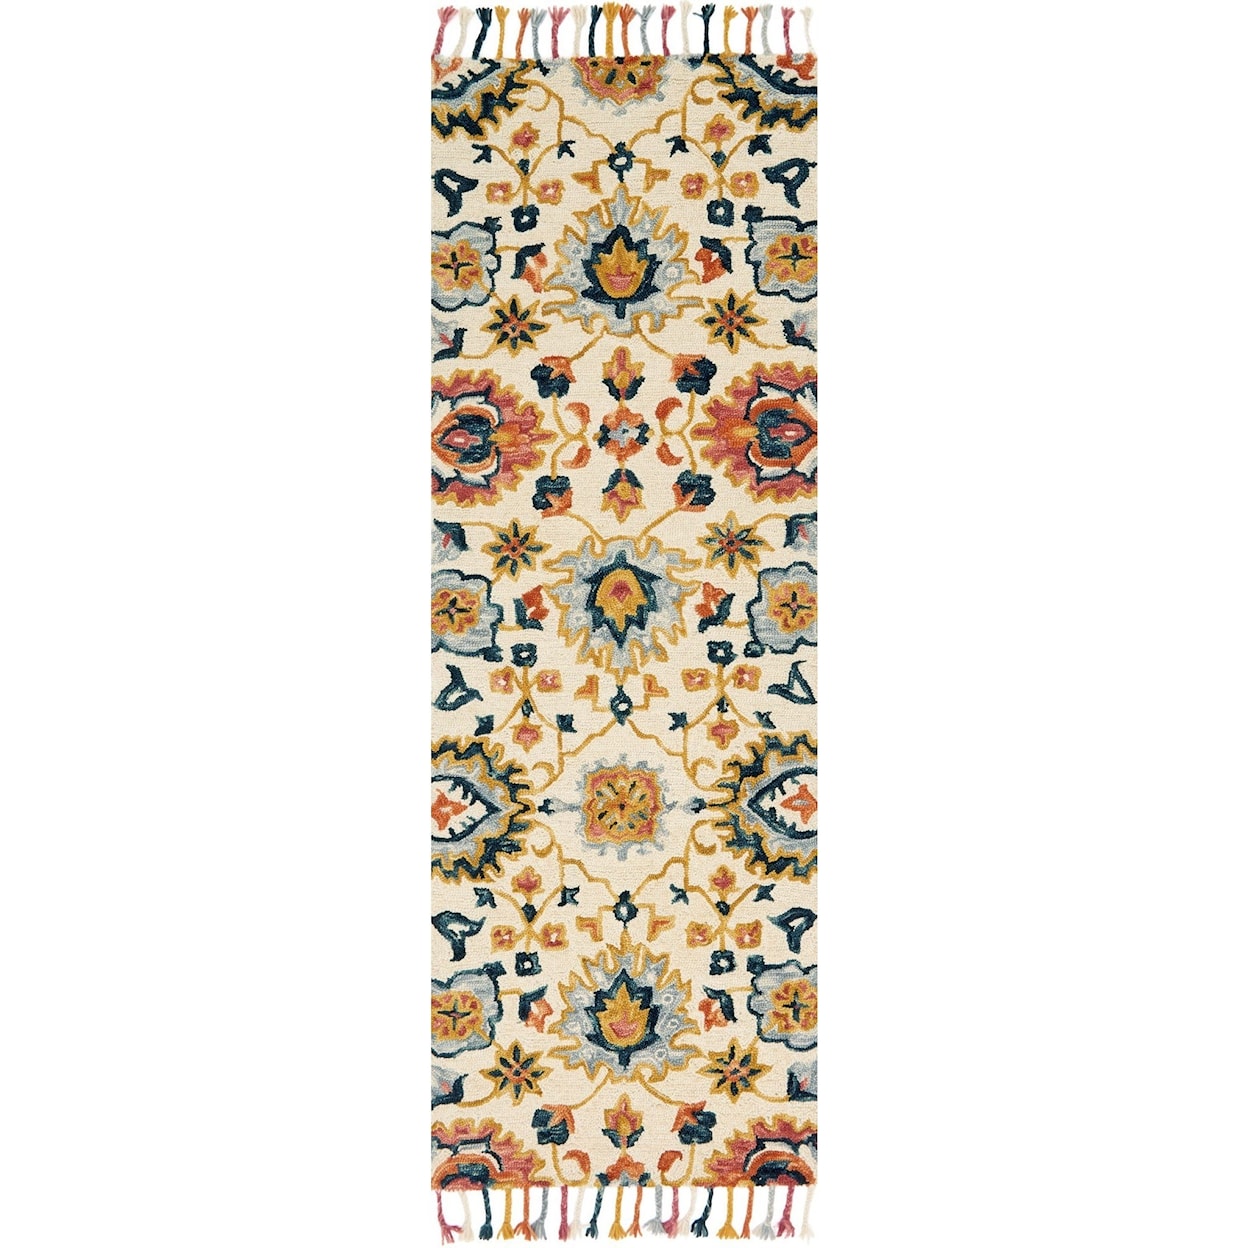 Magnolia Home by Joanna Gaines for Loloi Brushstroke 2' 6" X 7' 6" Runner Rug